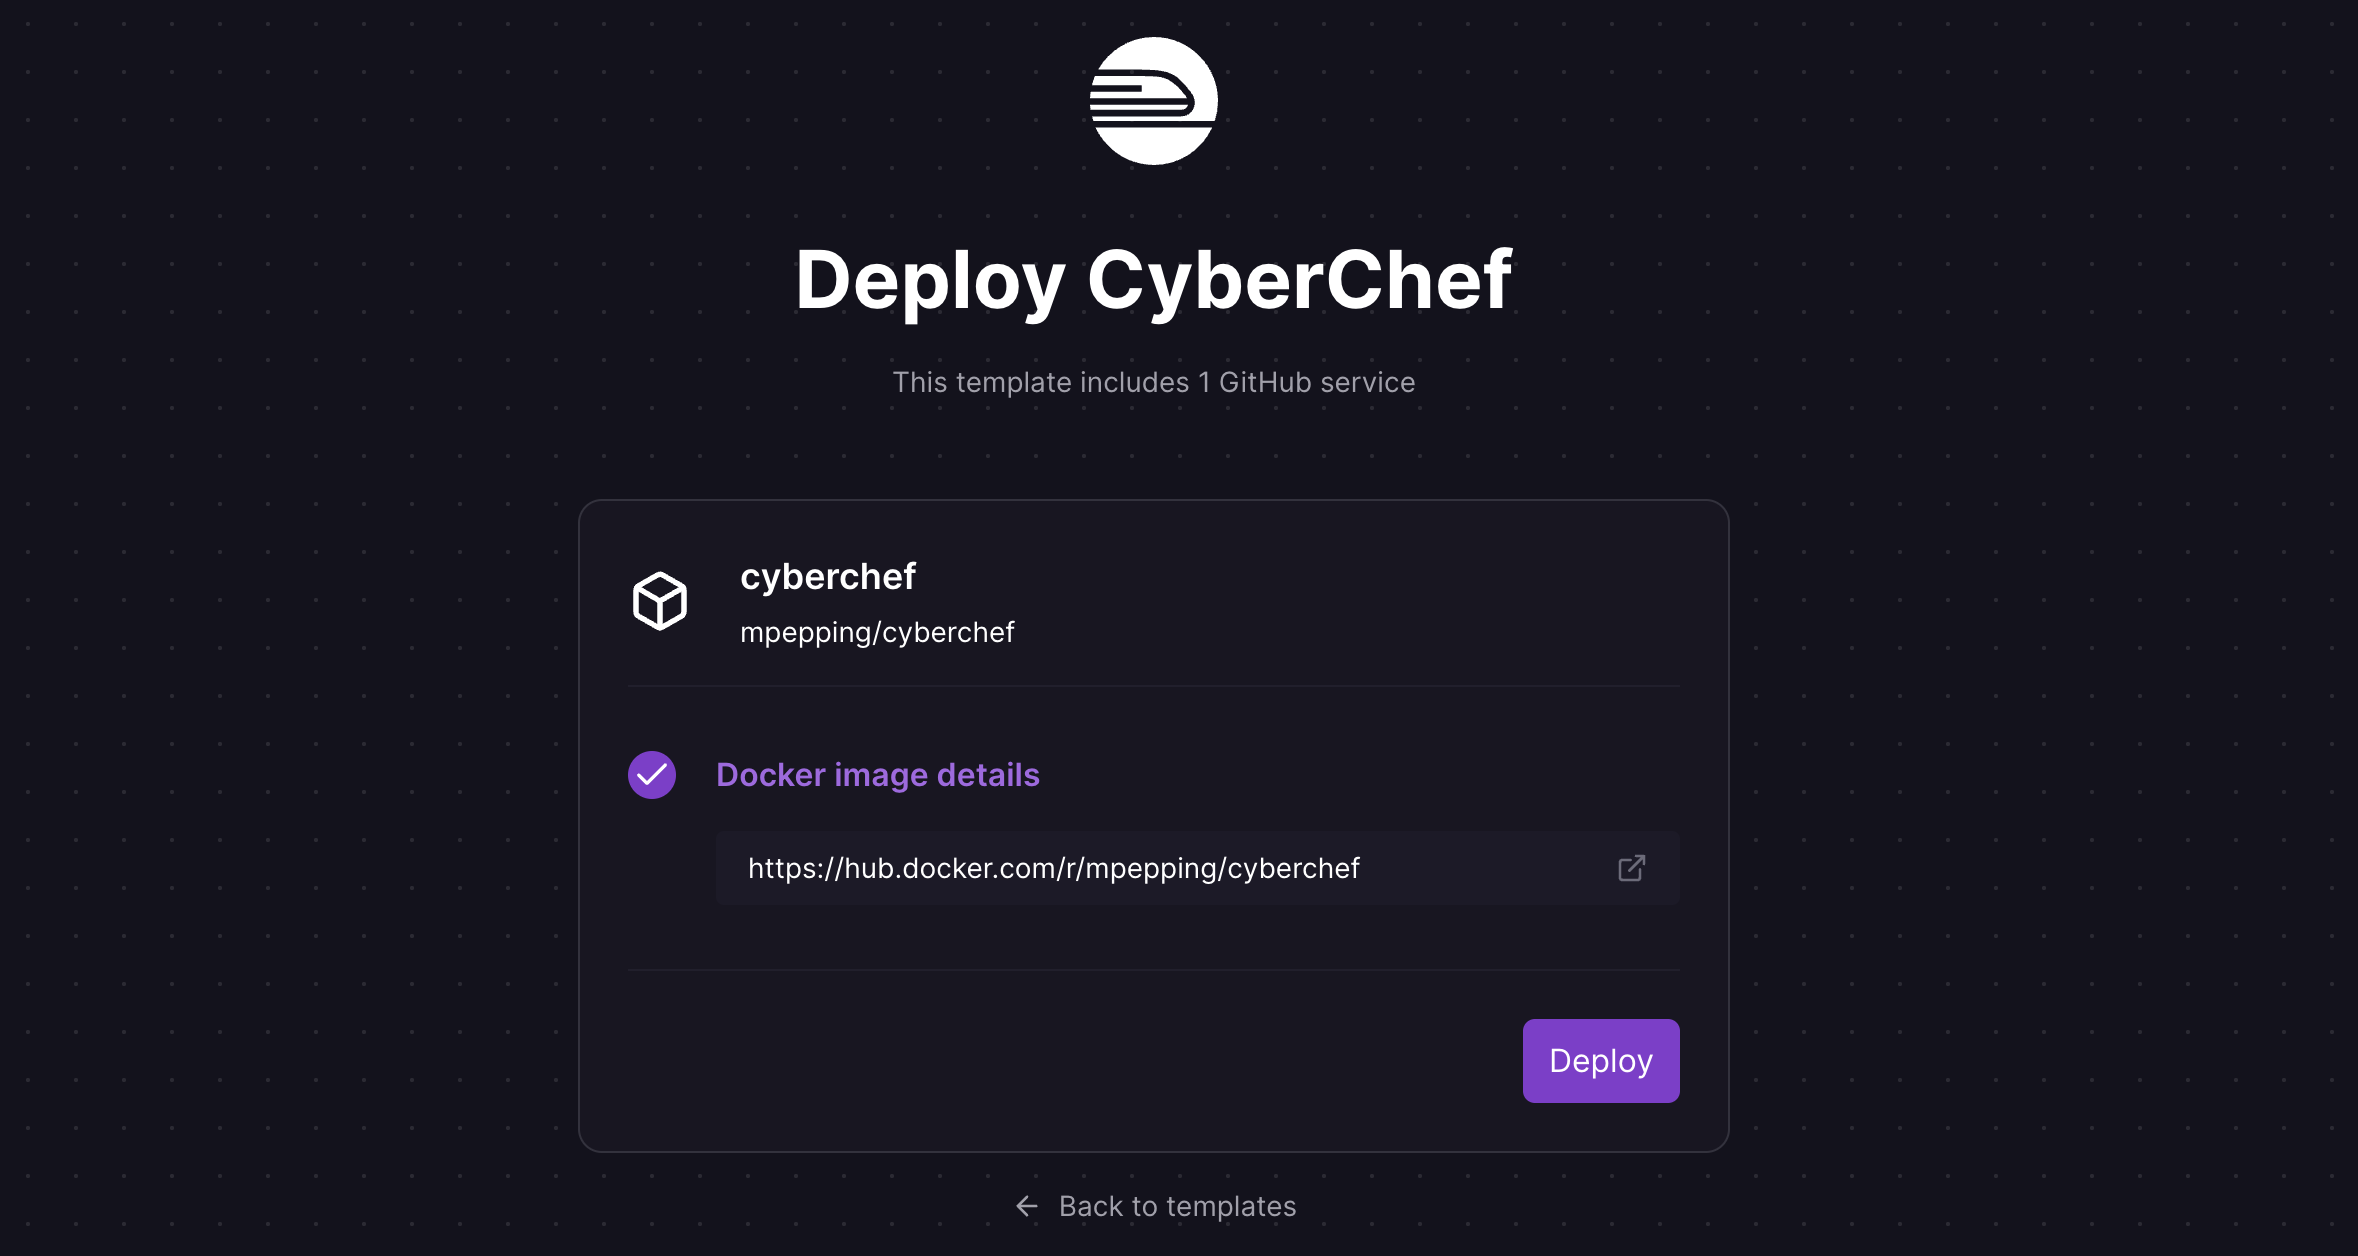 Deploy CyberChef using one-click template on Railway